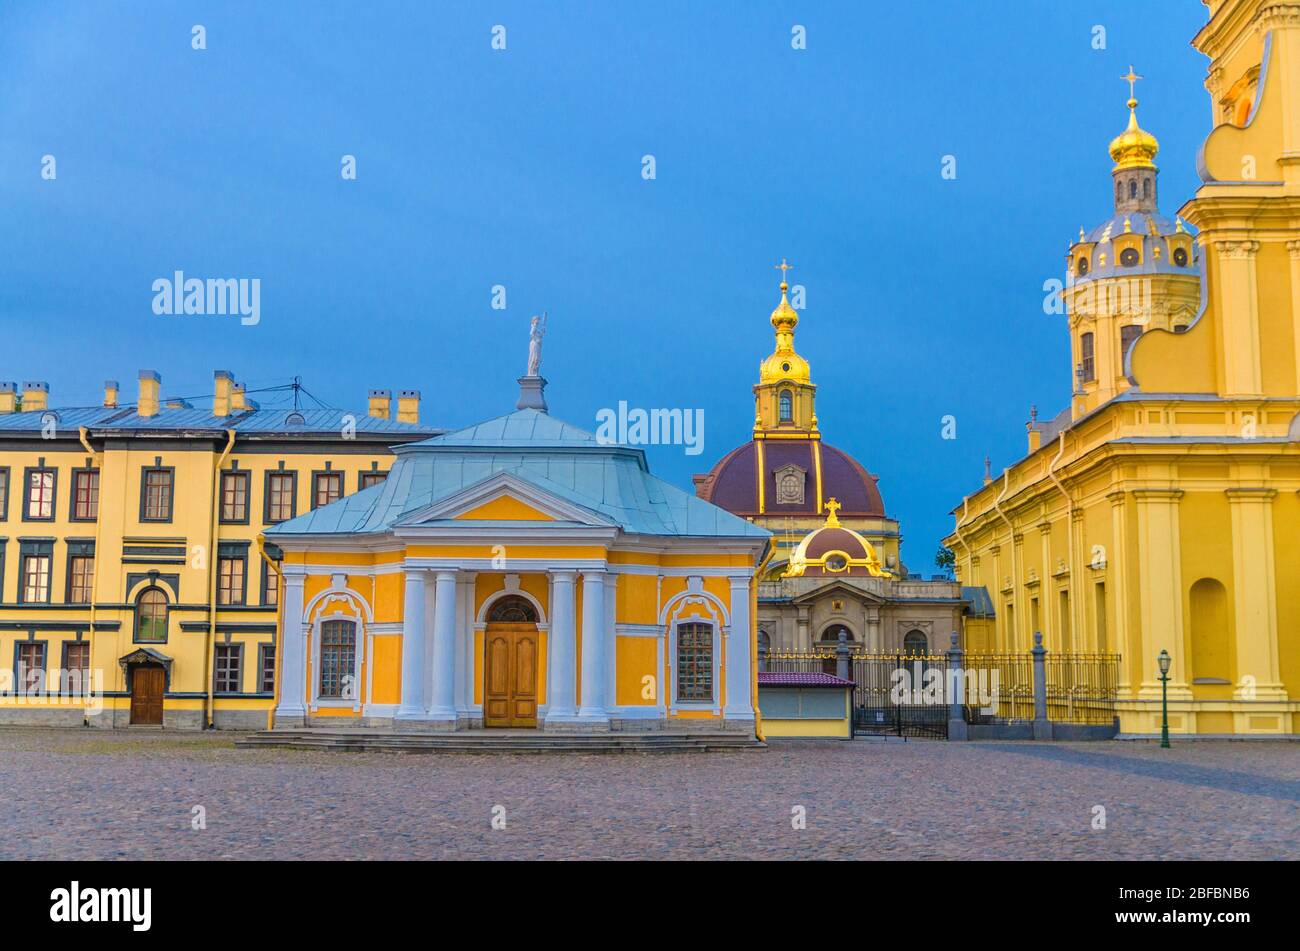 Boot house near Saints Peter and Paul Cathedral Orthodox church in Peter and Paul Fortress citadel on Zayachy Hare Island, evening dusk twilight view, Stock Photo